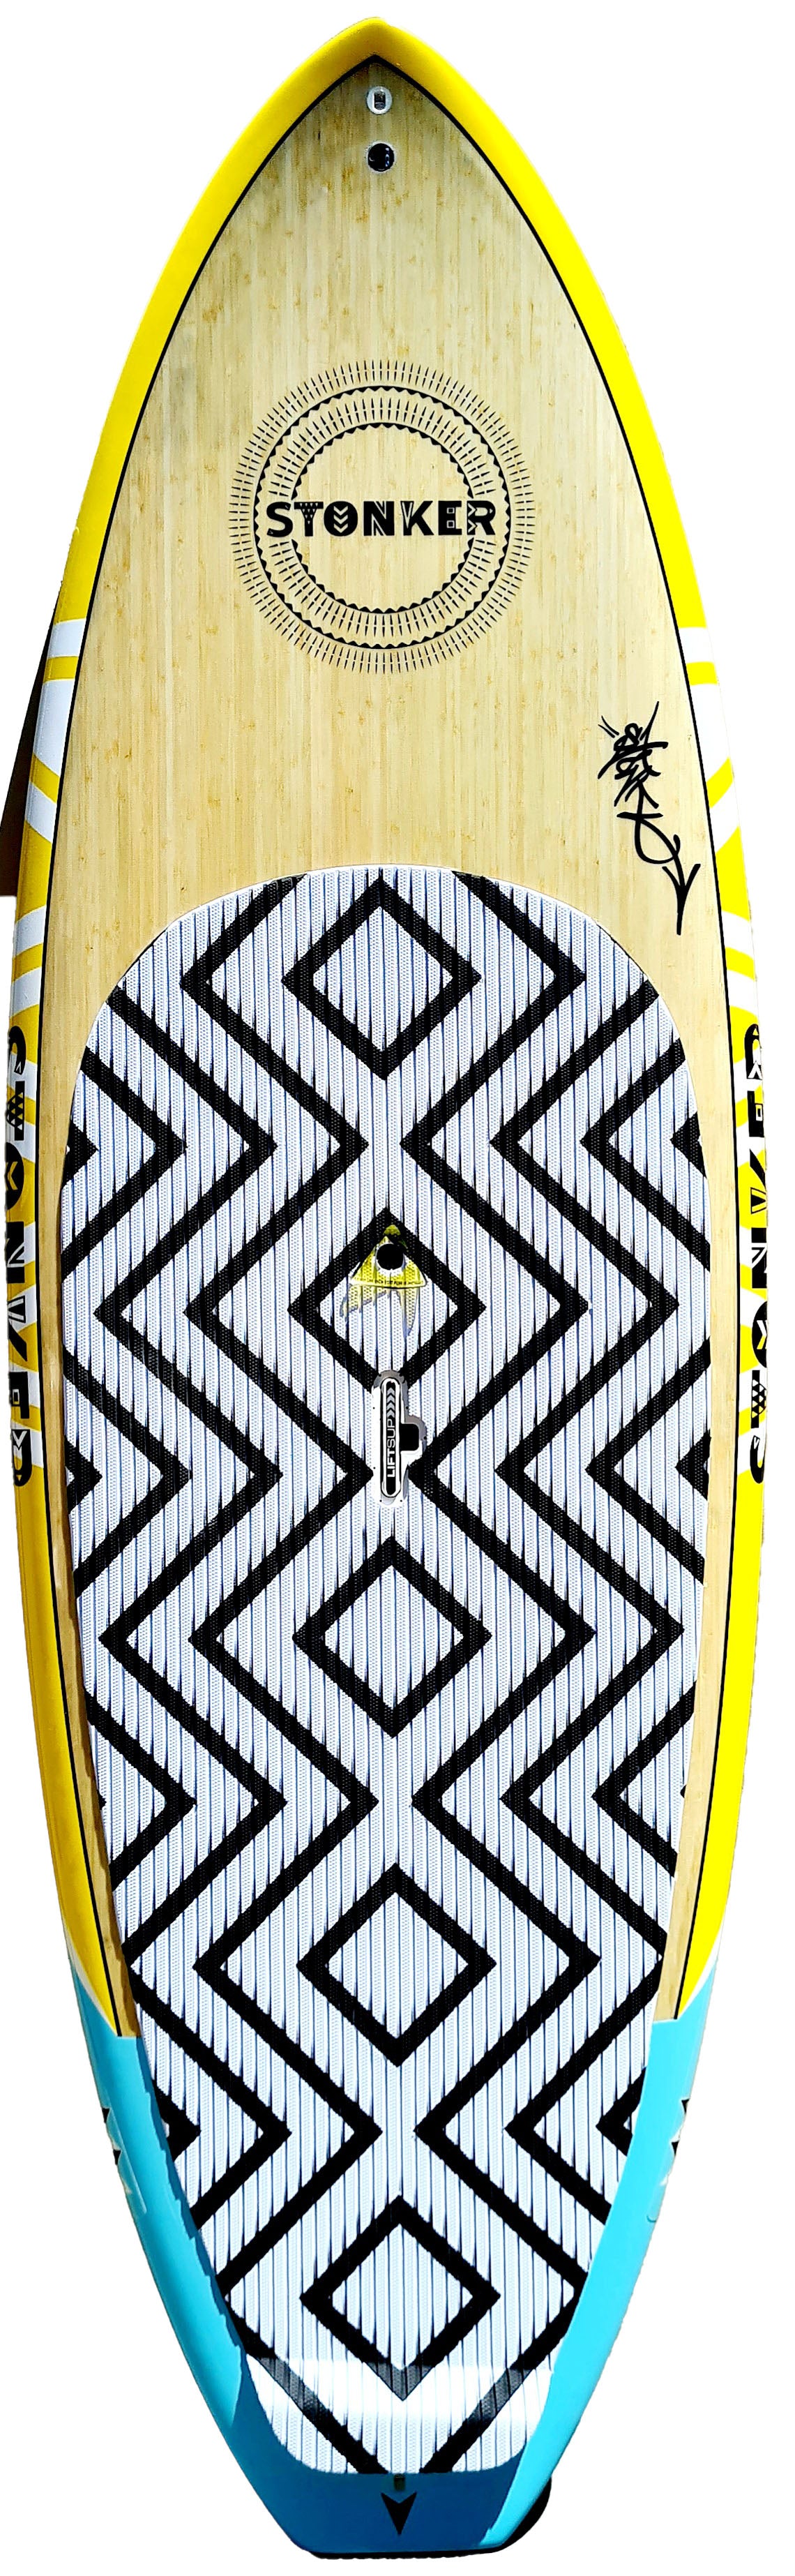 Stonker 9'6" x 32" 164L  Bamboo Carbon SUP*